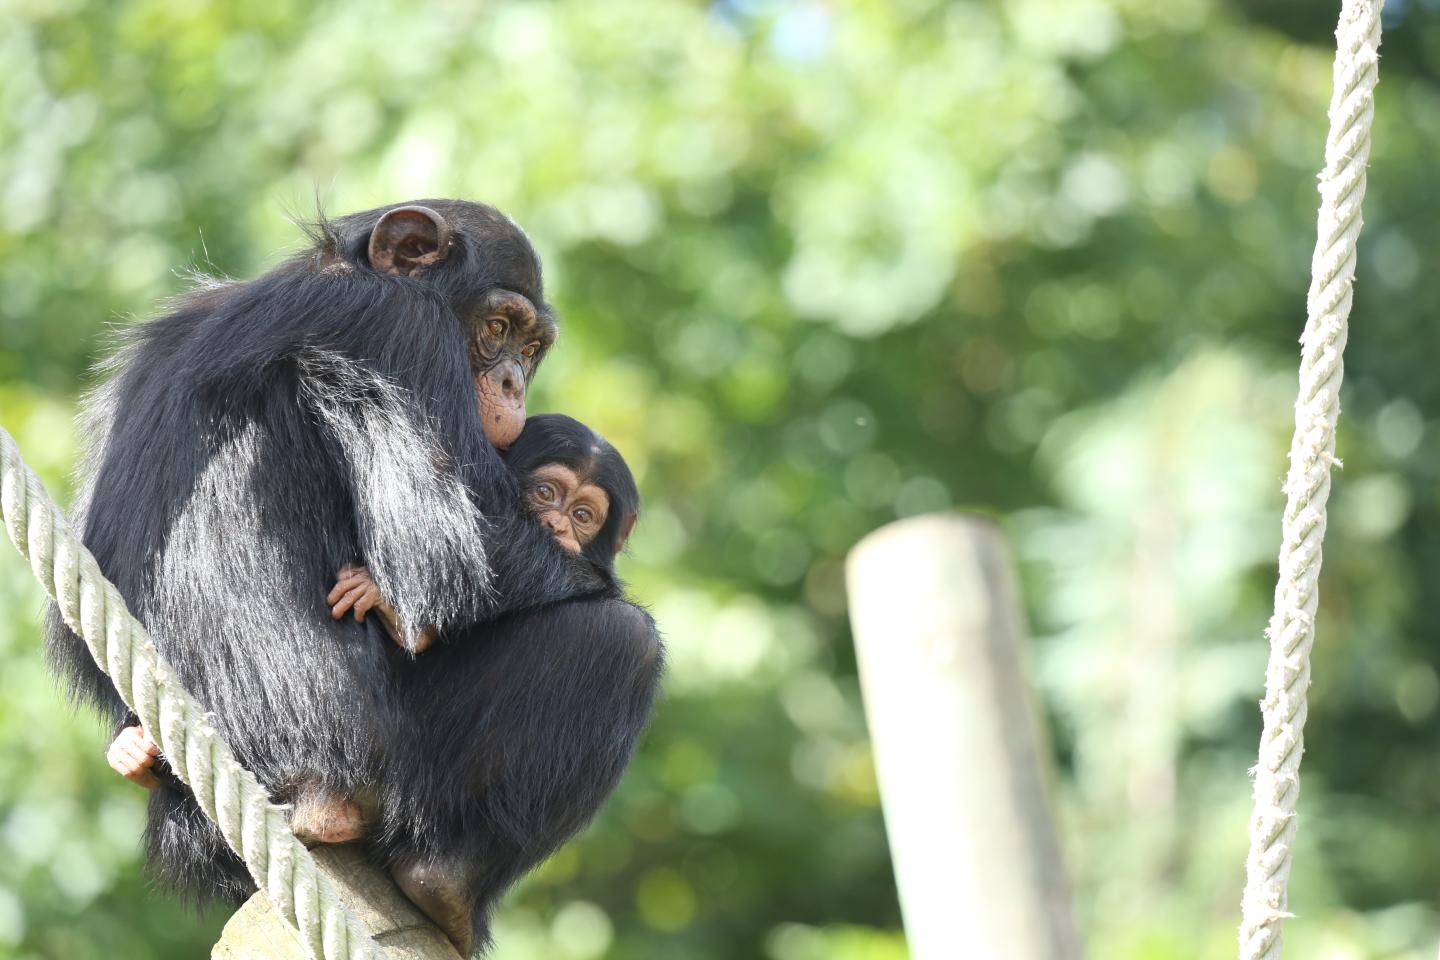 Apes sit closely together in a tree